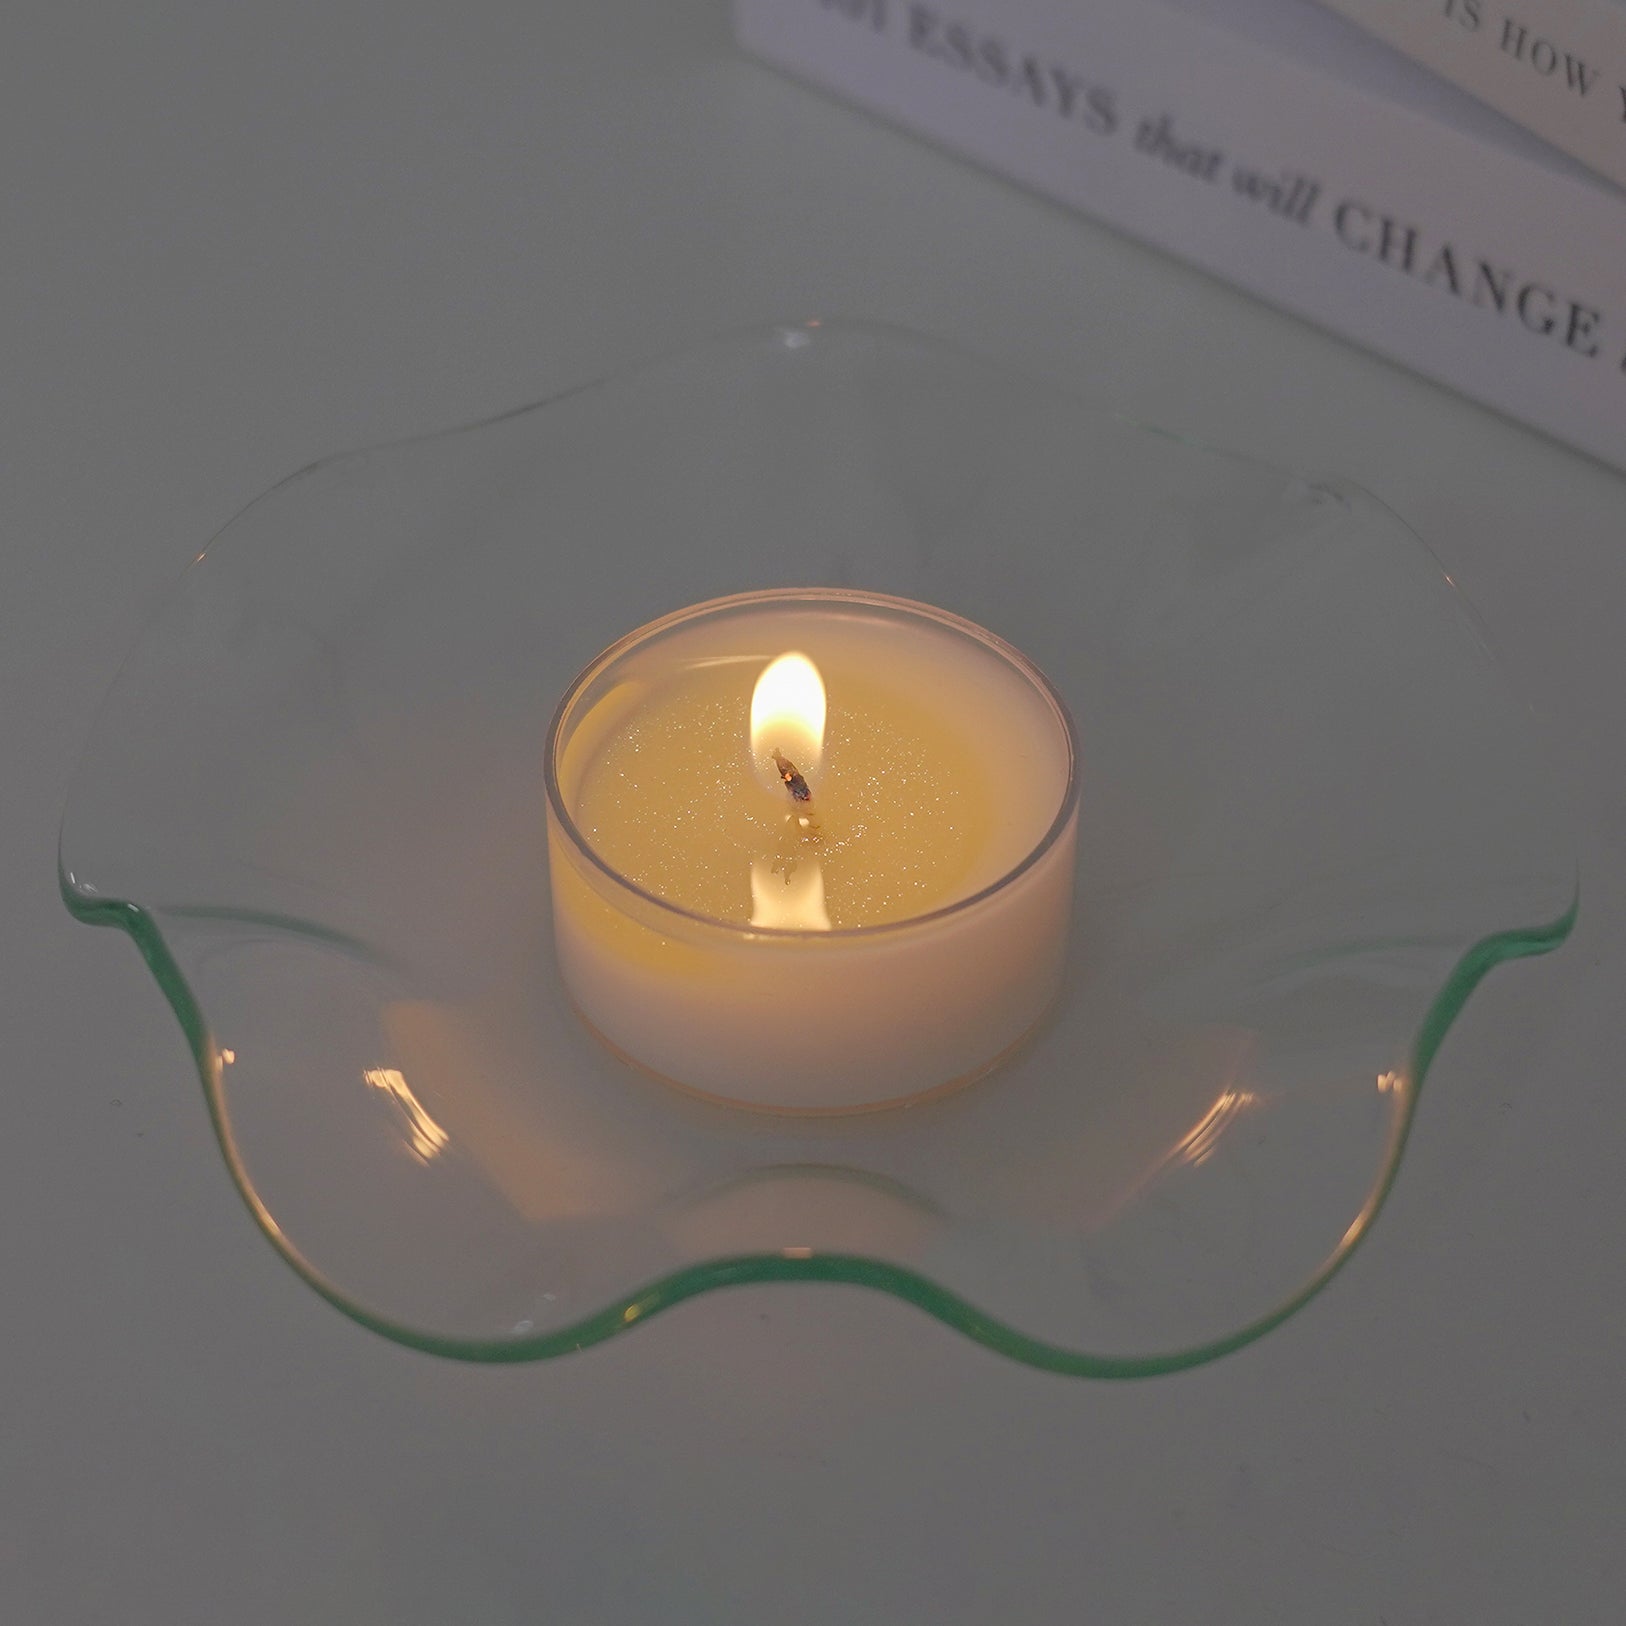 a lit tealight candle on a clear wavy ruffle dish